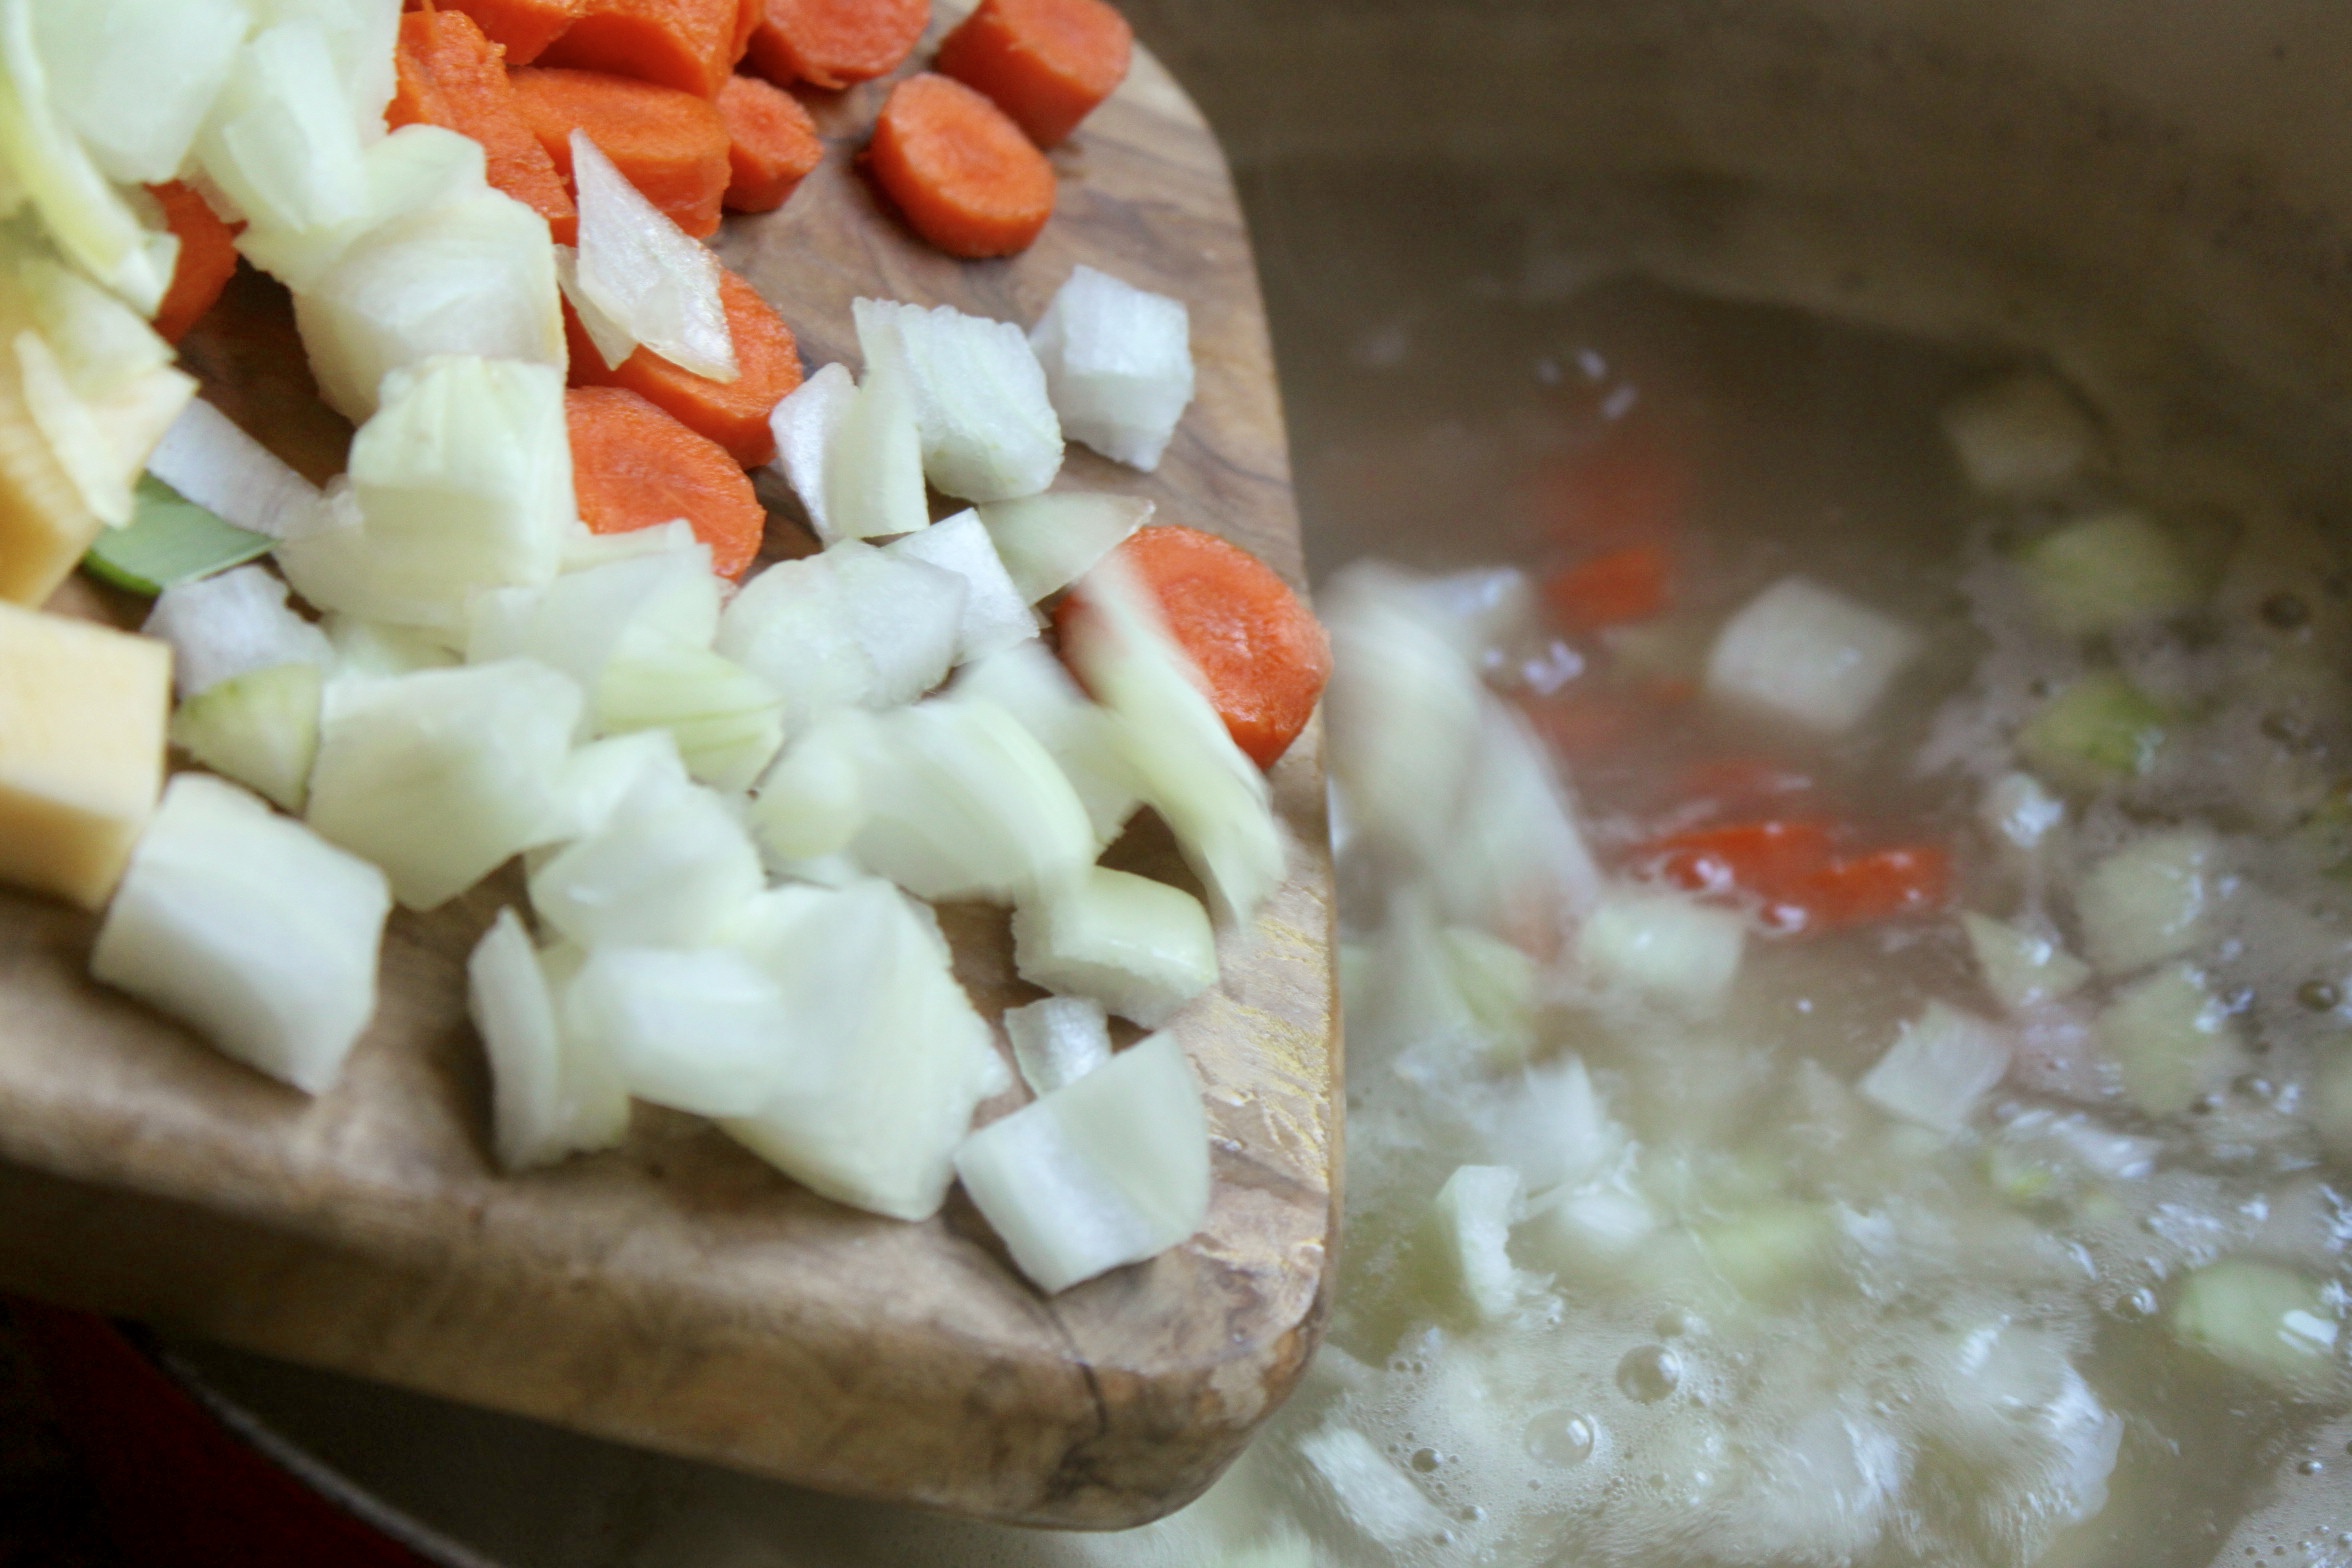 Adding vegetables to broth